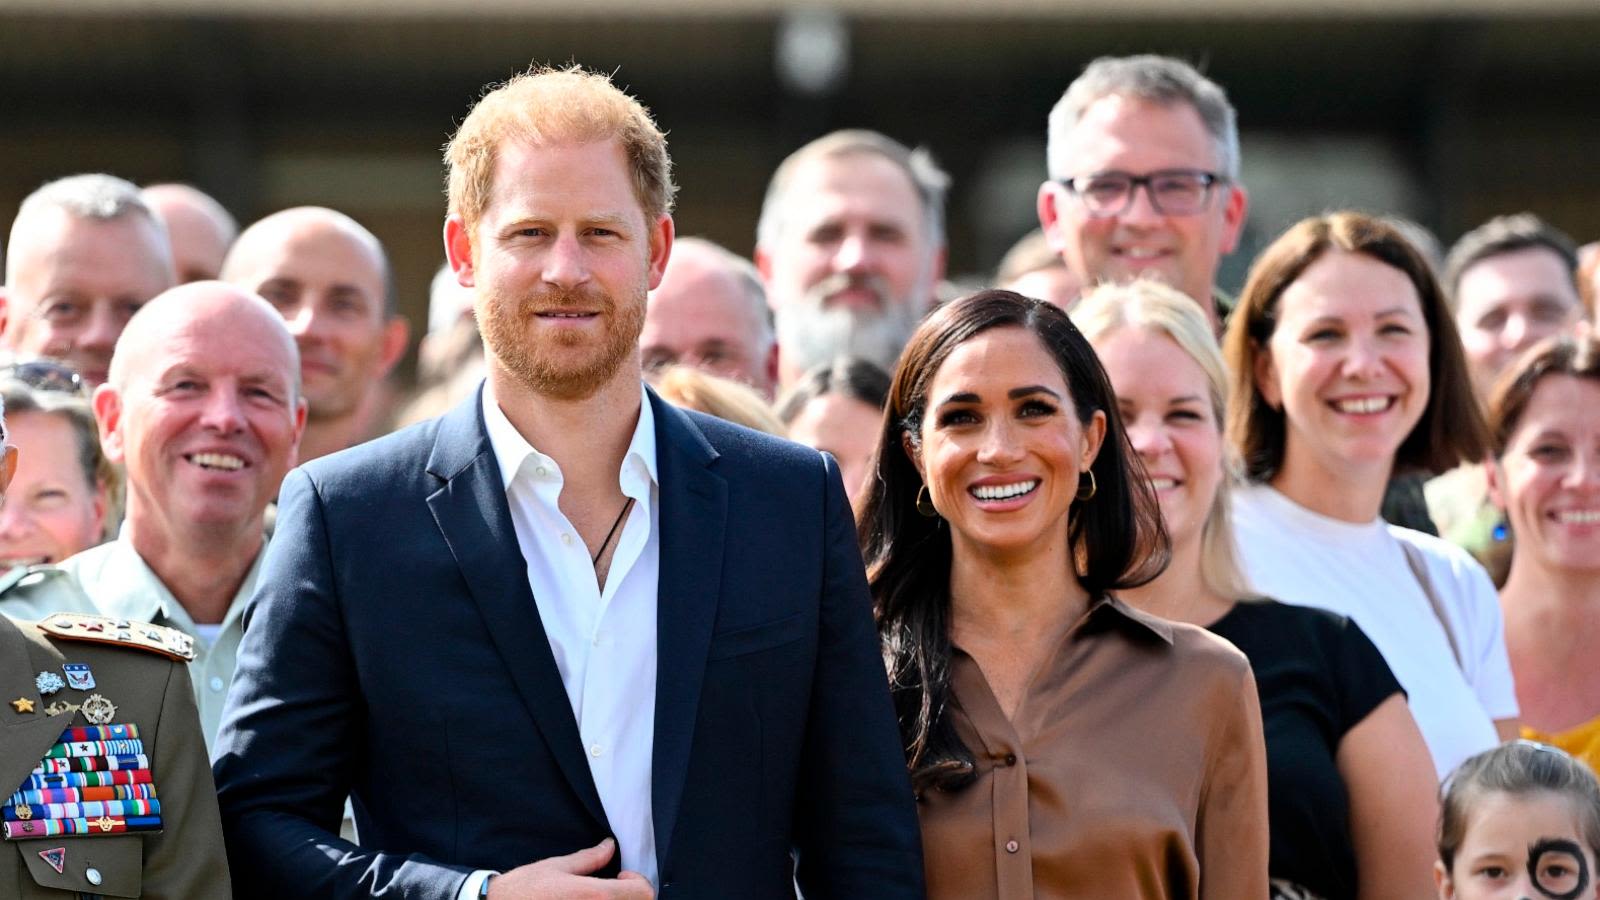 Prince Harry and Meghan Markle travel to Nigeria: What to know about their trip